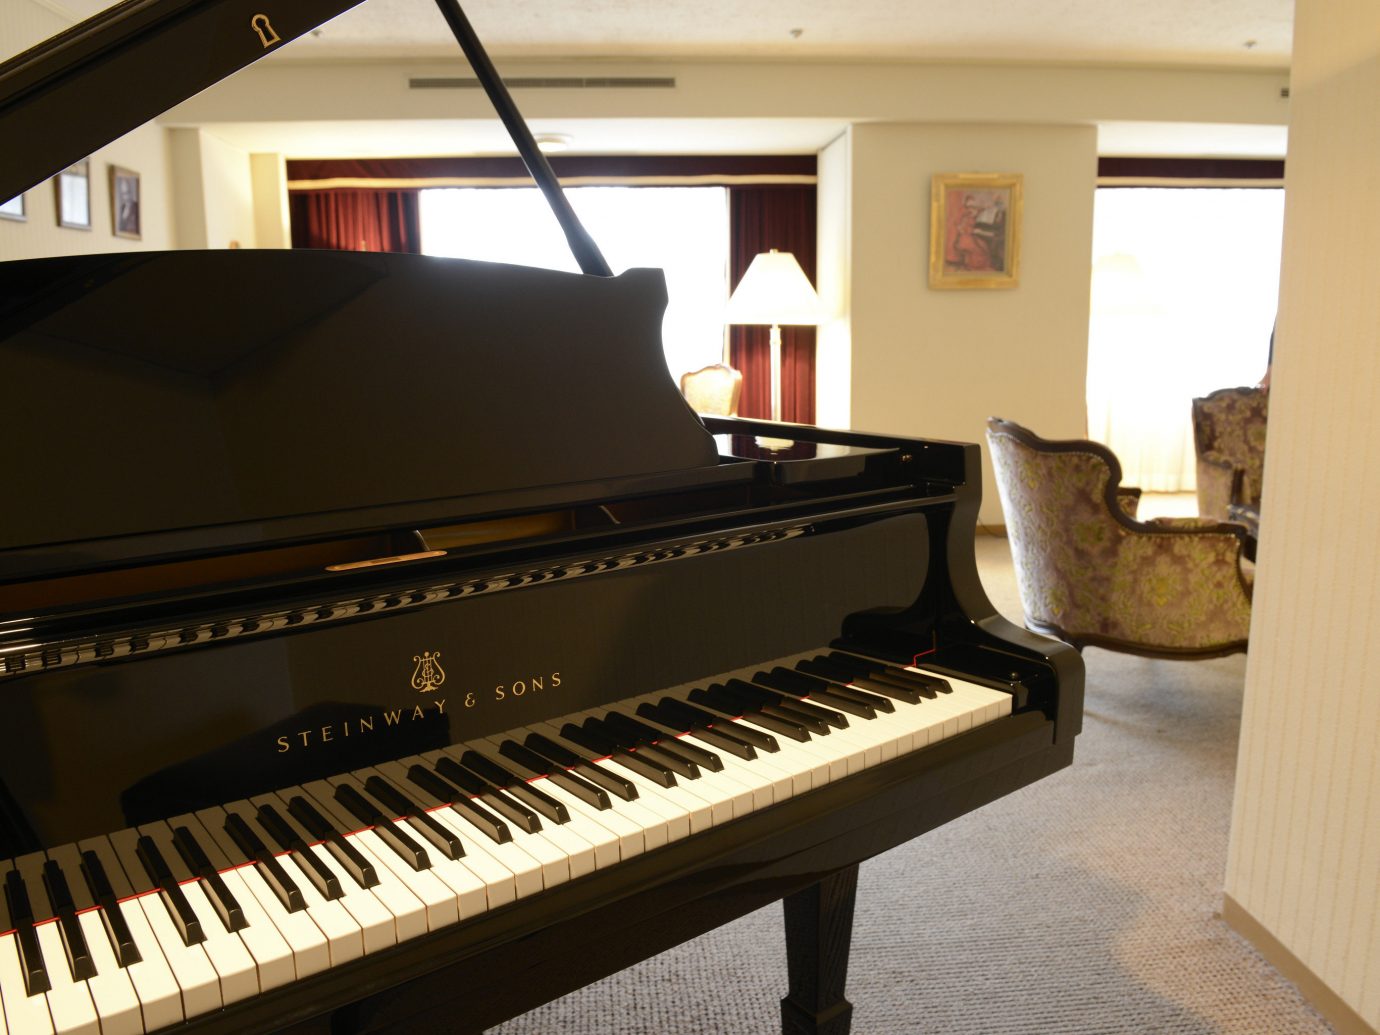 Hotels Japan Tokyo Music piano indoor wall floor musical instrument digital piano string instrument player piano electronic device technology keyboard fortepiano electric piano celesta luxury vehicle musical keyboard electronic instrument computer component clavier furniture